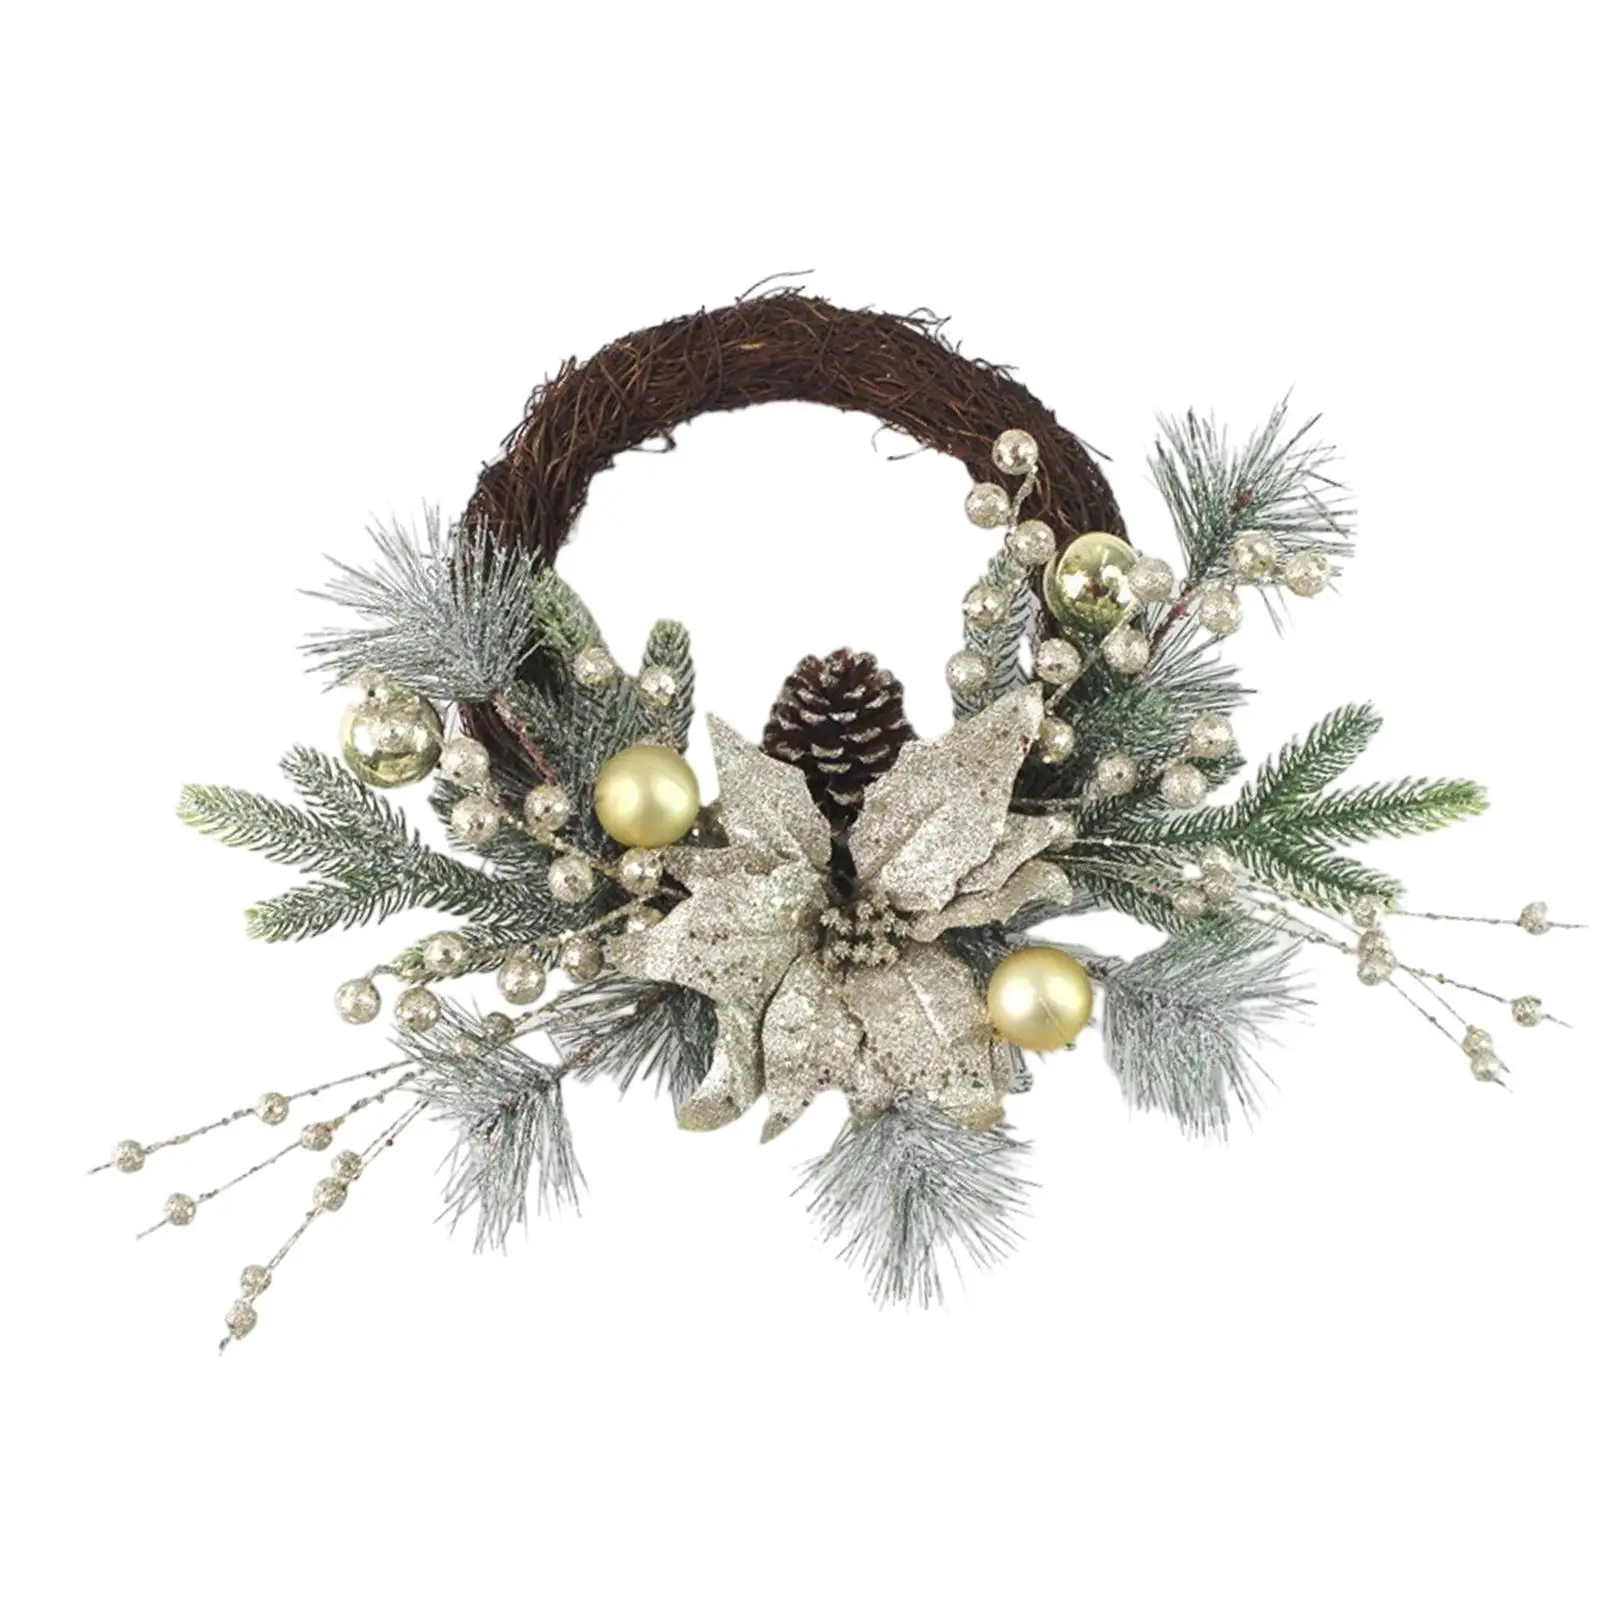 Christmas Wreath with Lights Christmas Decoration Ornament Christmas Front Door Wreath for Indoor Wall Wedding Farmhouse Window